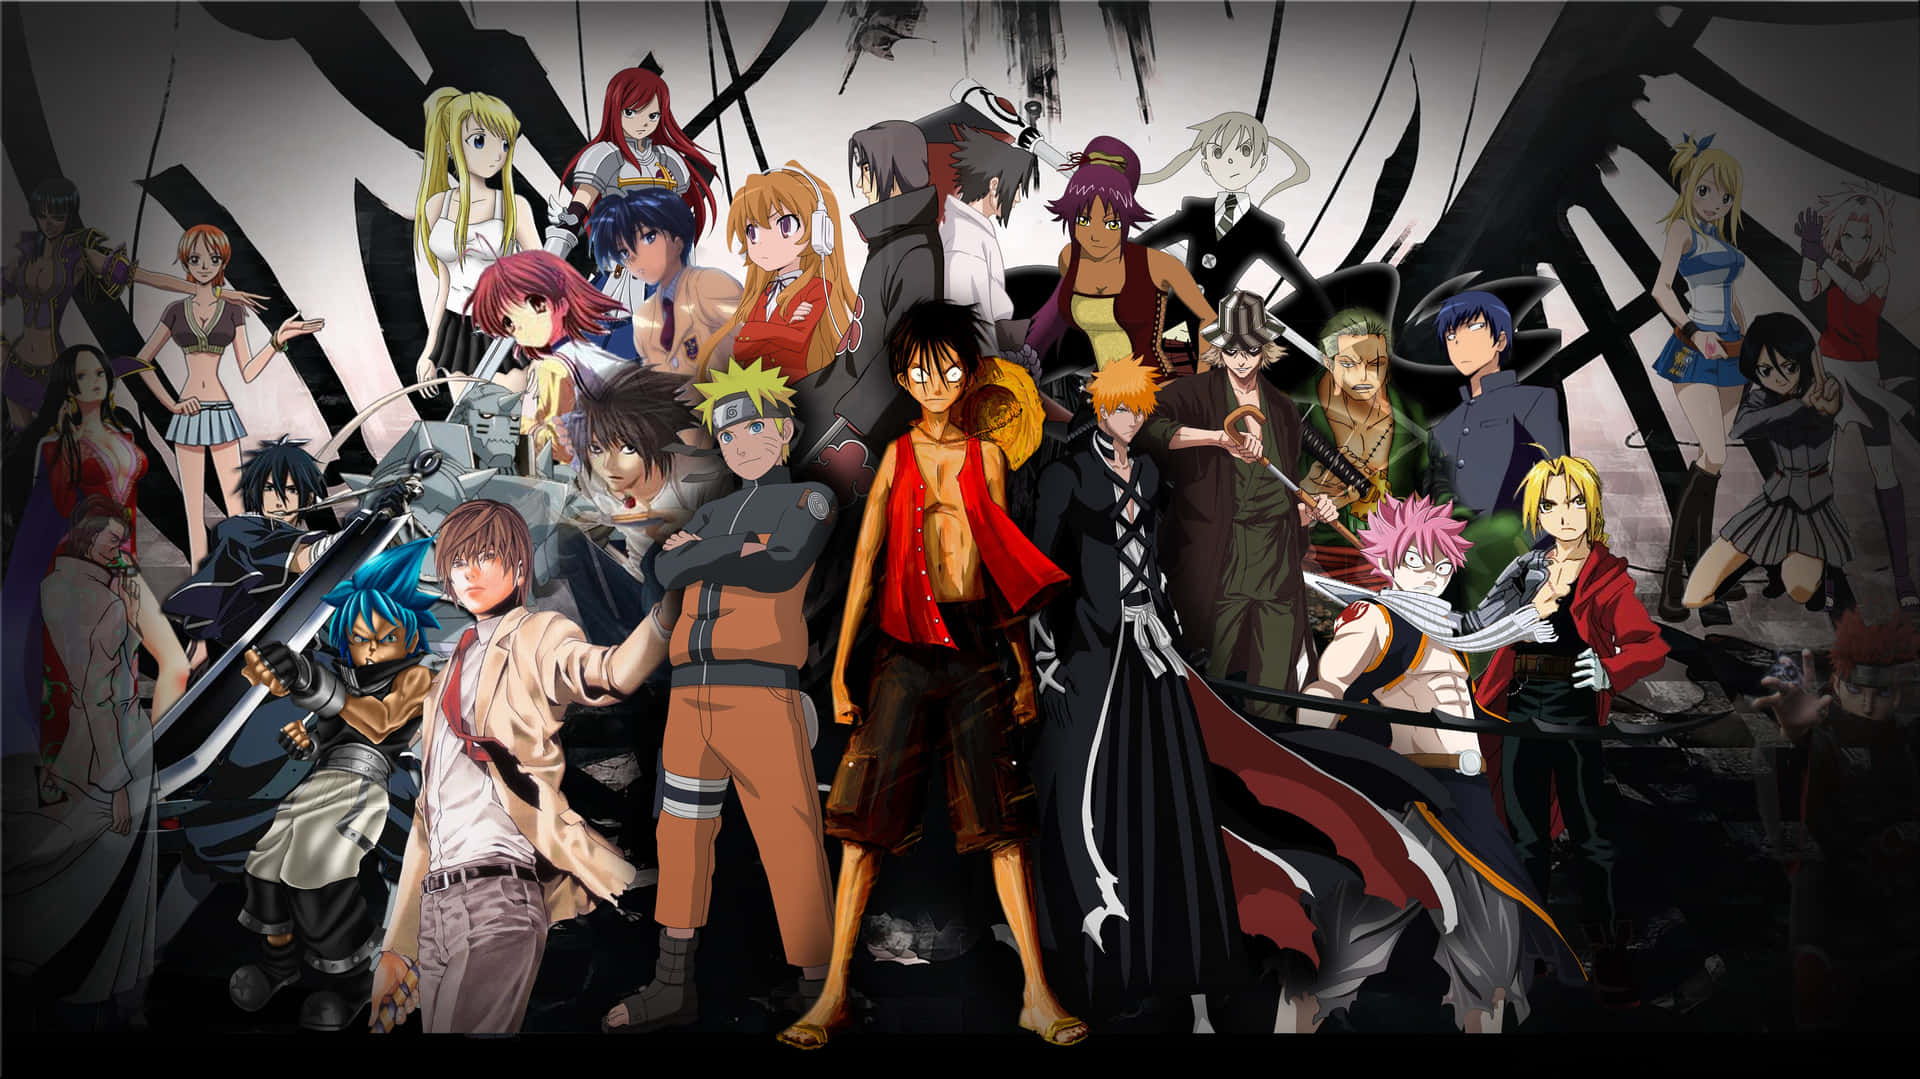 All your favorite anime characters in one high-definition image. Wallpaper